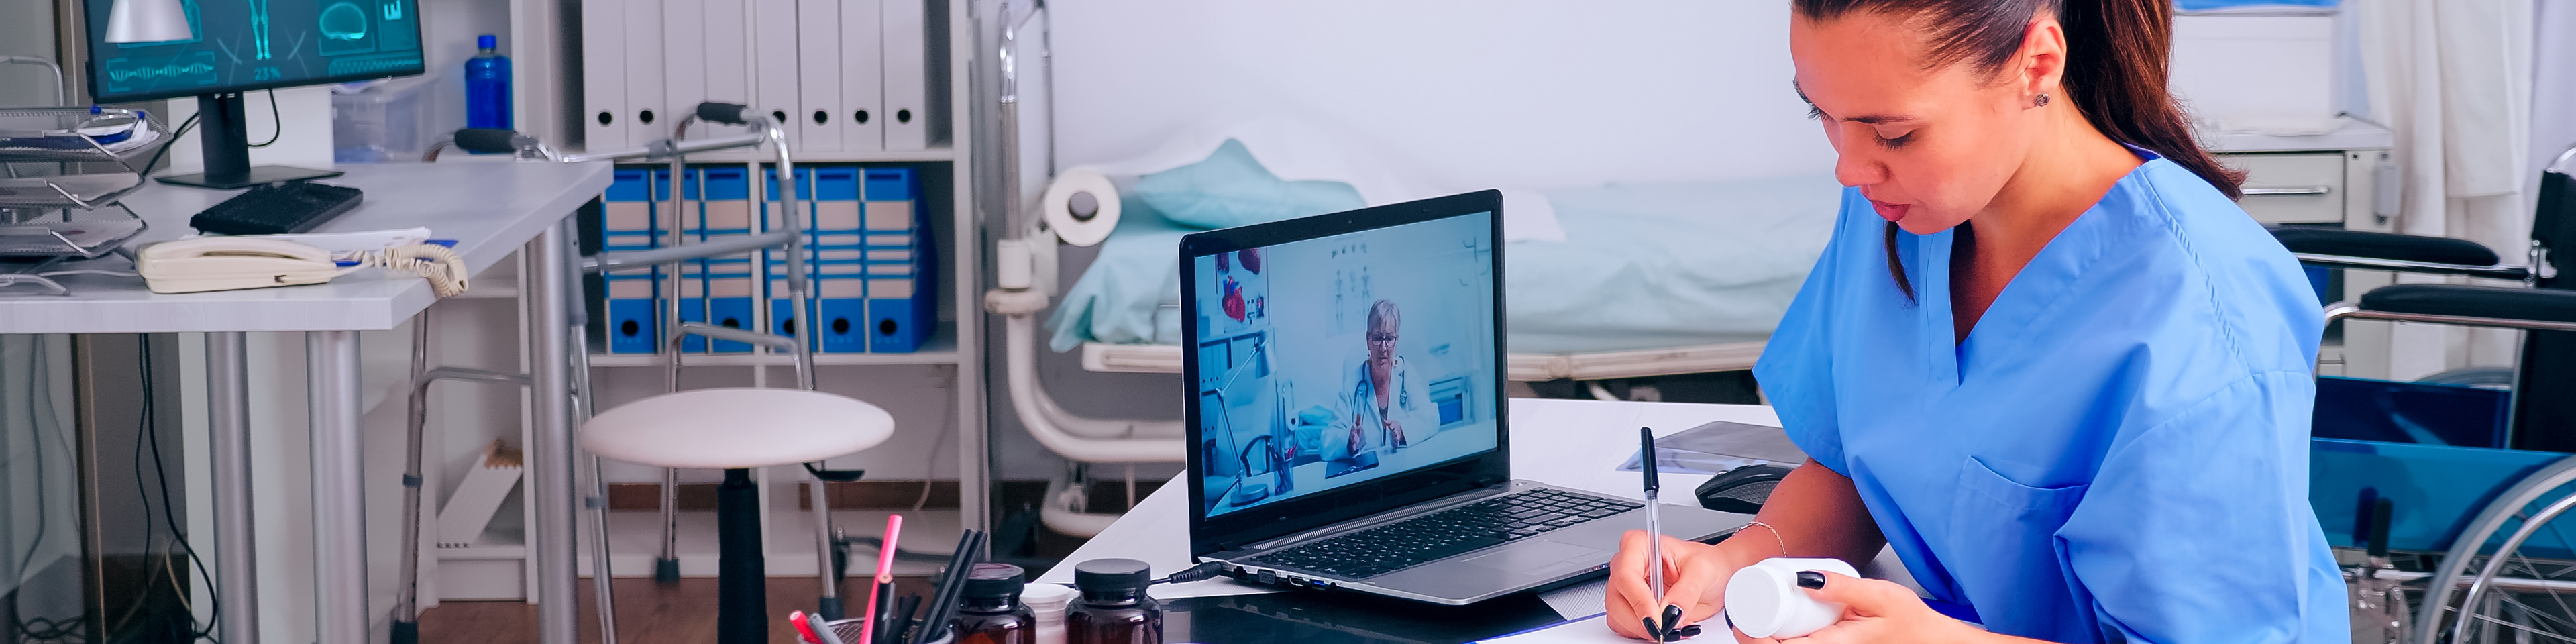 Nurse taking notes listening to remote doctor during video call